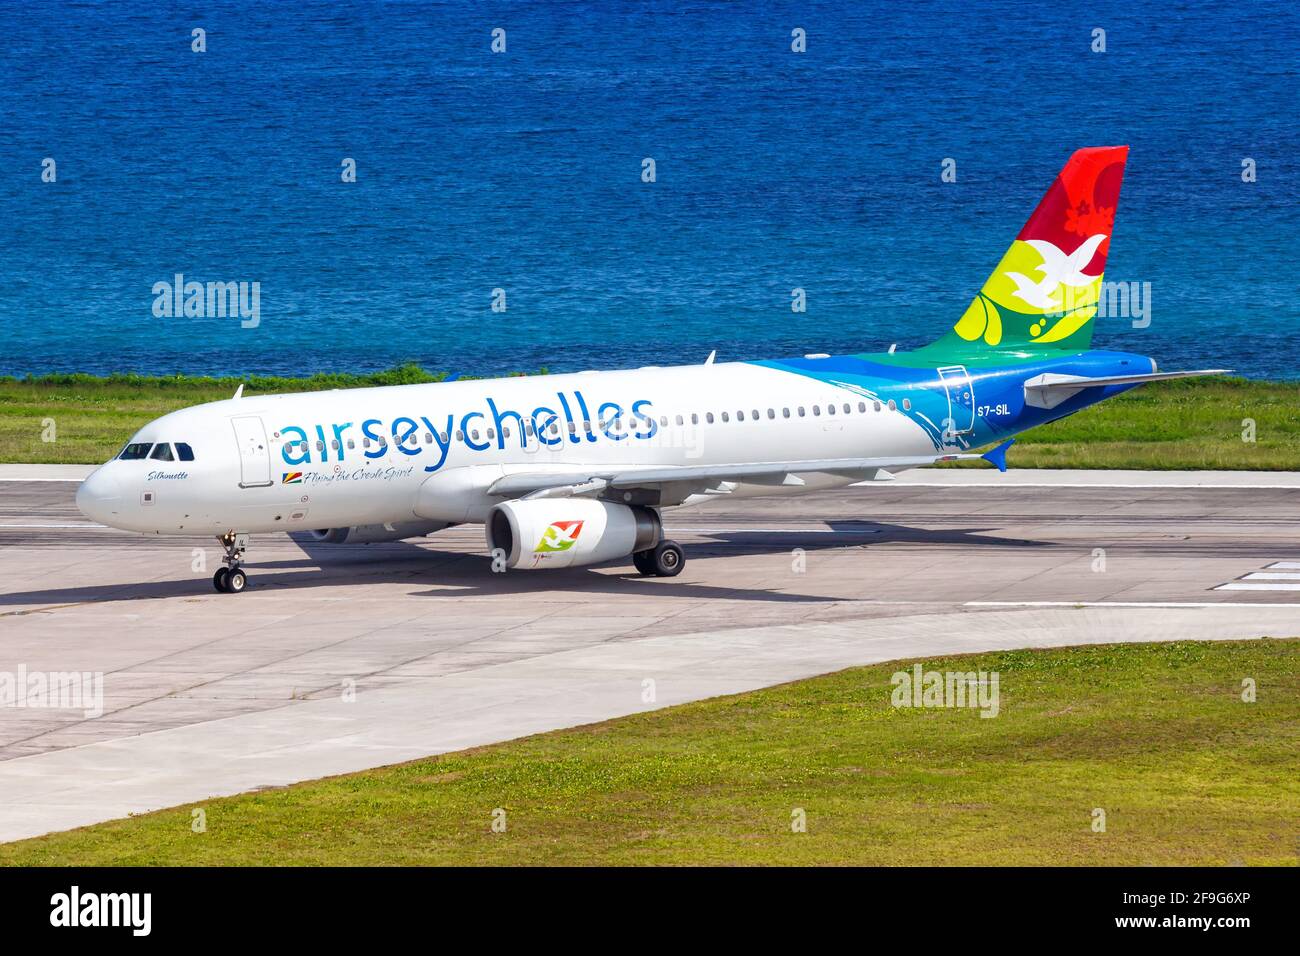 Mahe, Seychelles - November 24, 2017: Air Seychelles Airbus A320 airplane at Seychelles International Airport (SEZ) in the Seychelles. Airbus is a Eur Stock Photo